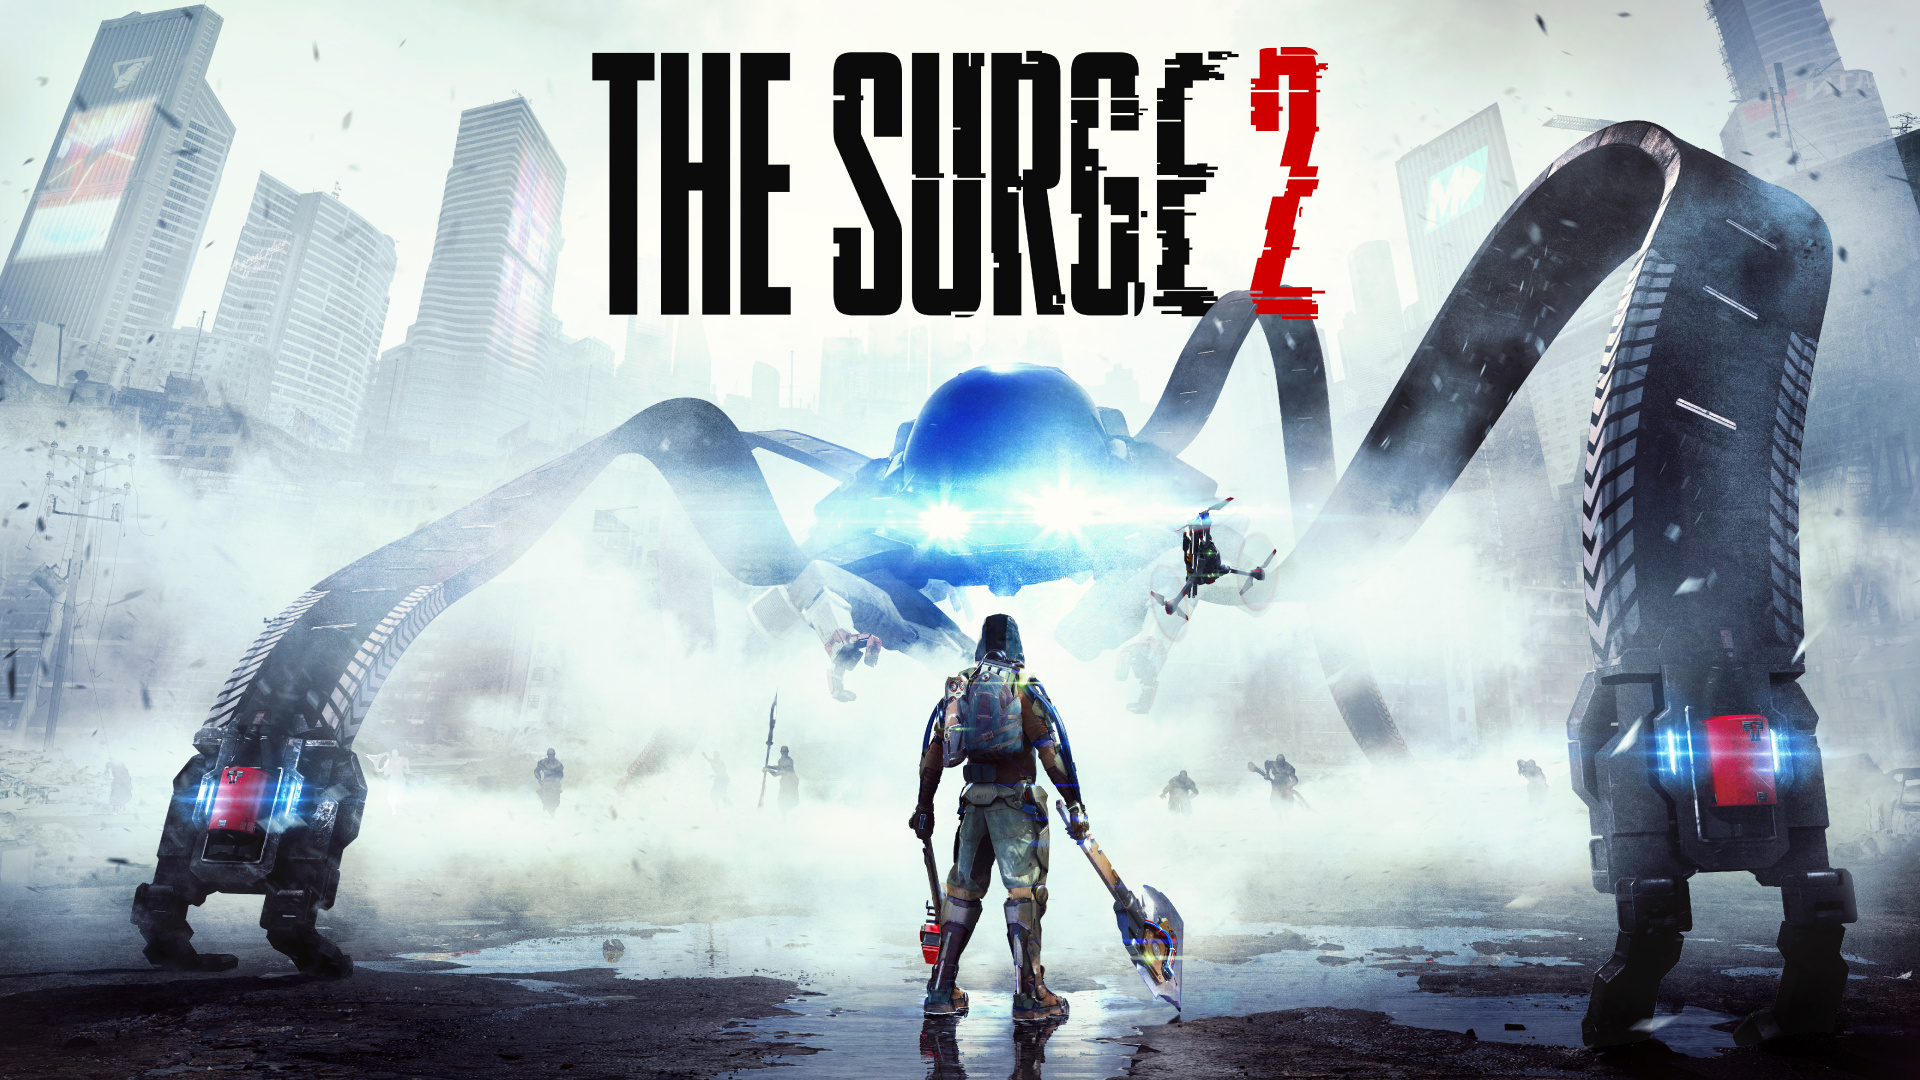 The Surge 2, The Surge, Deck13, Focus Home Interactive, Playstation 4. Wallpaper in 1920x1080 Resolution